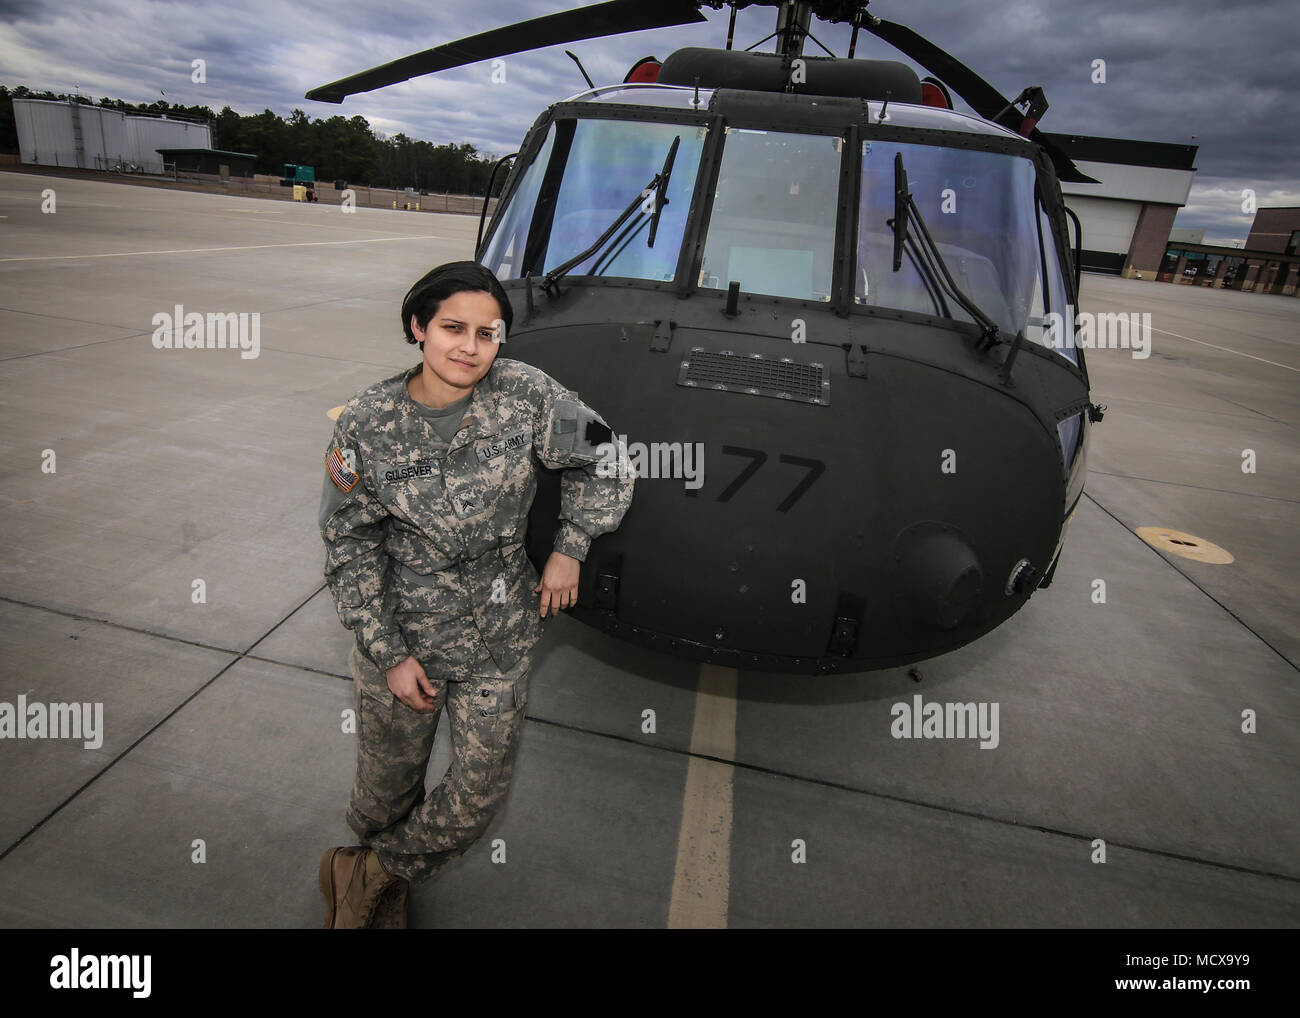 U.S. Army National Guard Cpl. Melinda Gulsever stands for a portrait with a UH-60L Black Hawk helicopter at the New Jersey National Guard's Army Aviation Support Facility, Joint Base McGuire-Dix-Lakehurst, N.J., March 5, 2018. Gulsever is an egine mechanic, and is also the head brewer for Backwards Flag Brewing Co. (U.S. Air National Guard photo by Master Sgt. Matt Hecht) Stock Photo